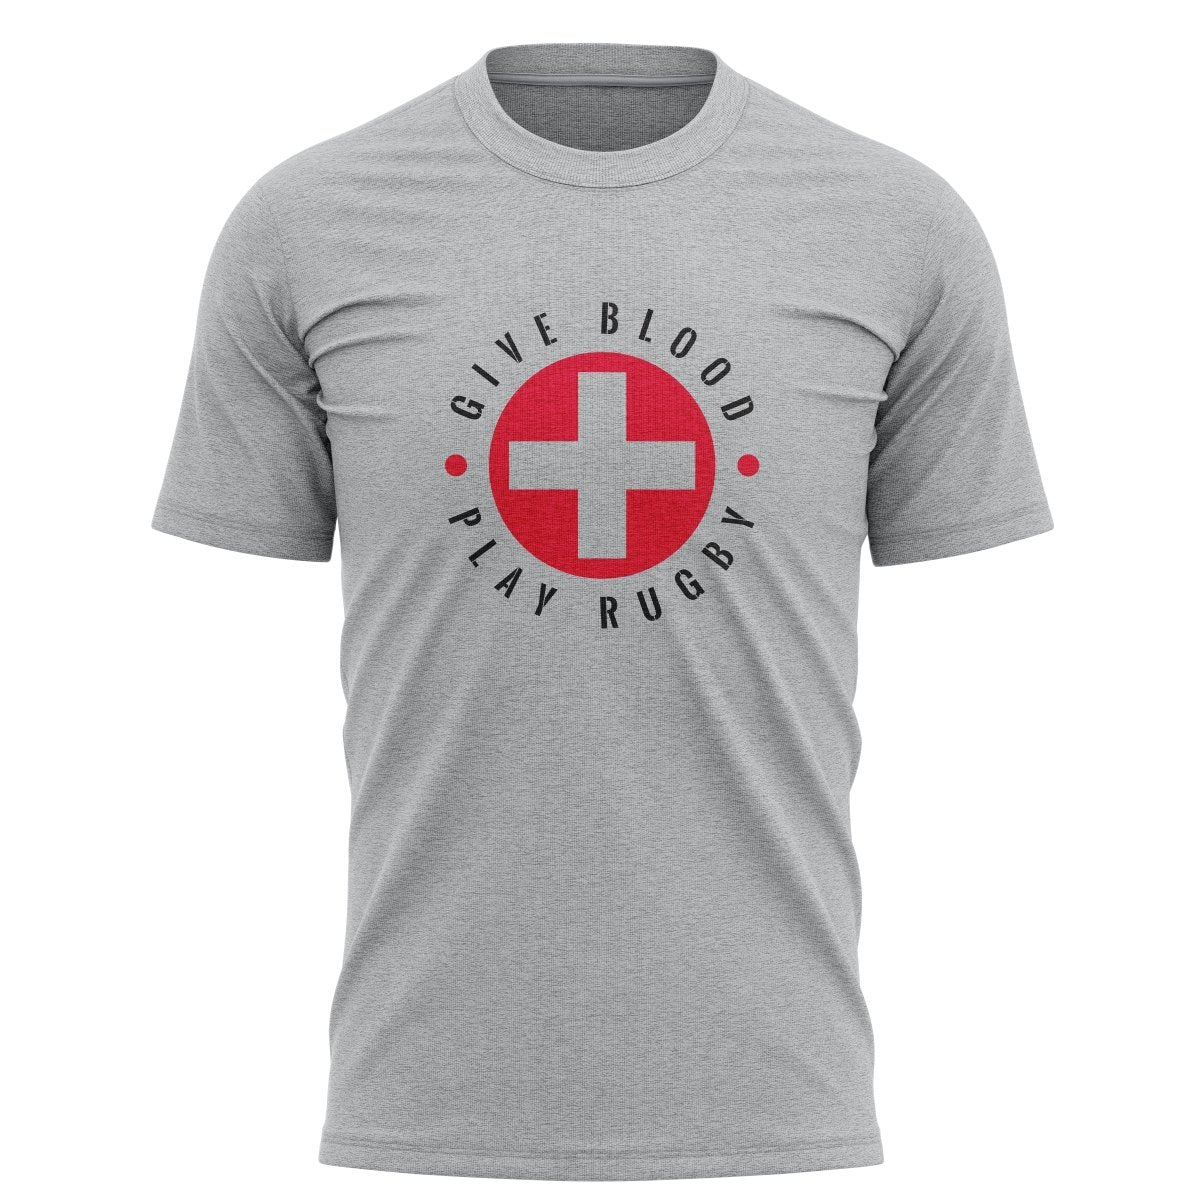 Give Blood PLAy Rugby Graphic Tee - www.therugbyshop.com www.therugbyshop.com MEN&#39;S / HEATHER GREY / S XIX Brands TEES Give Blood PLAy Rugby Graphic Tee